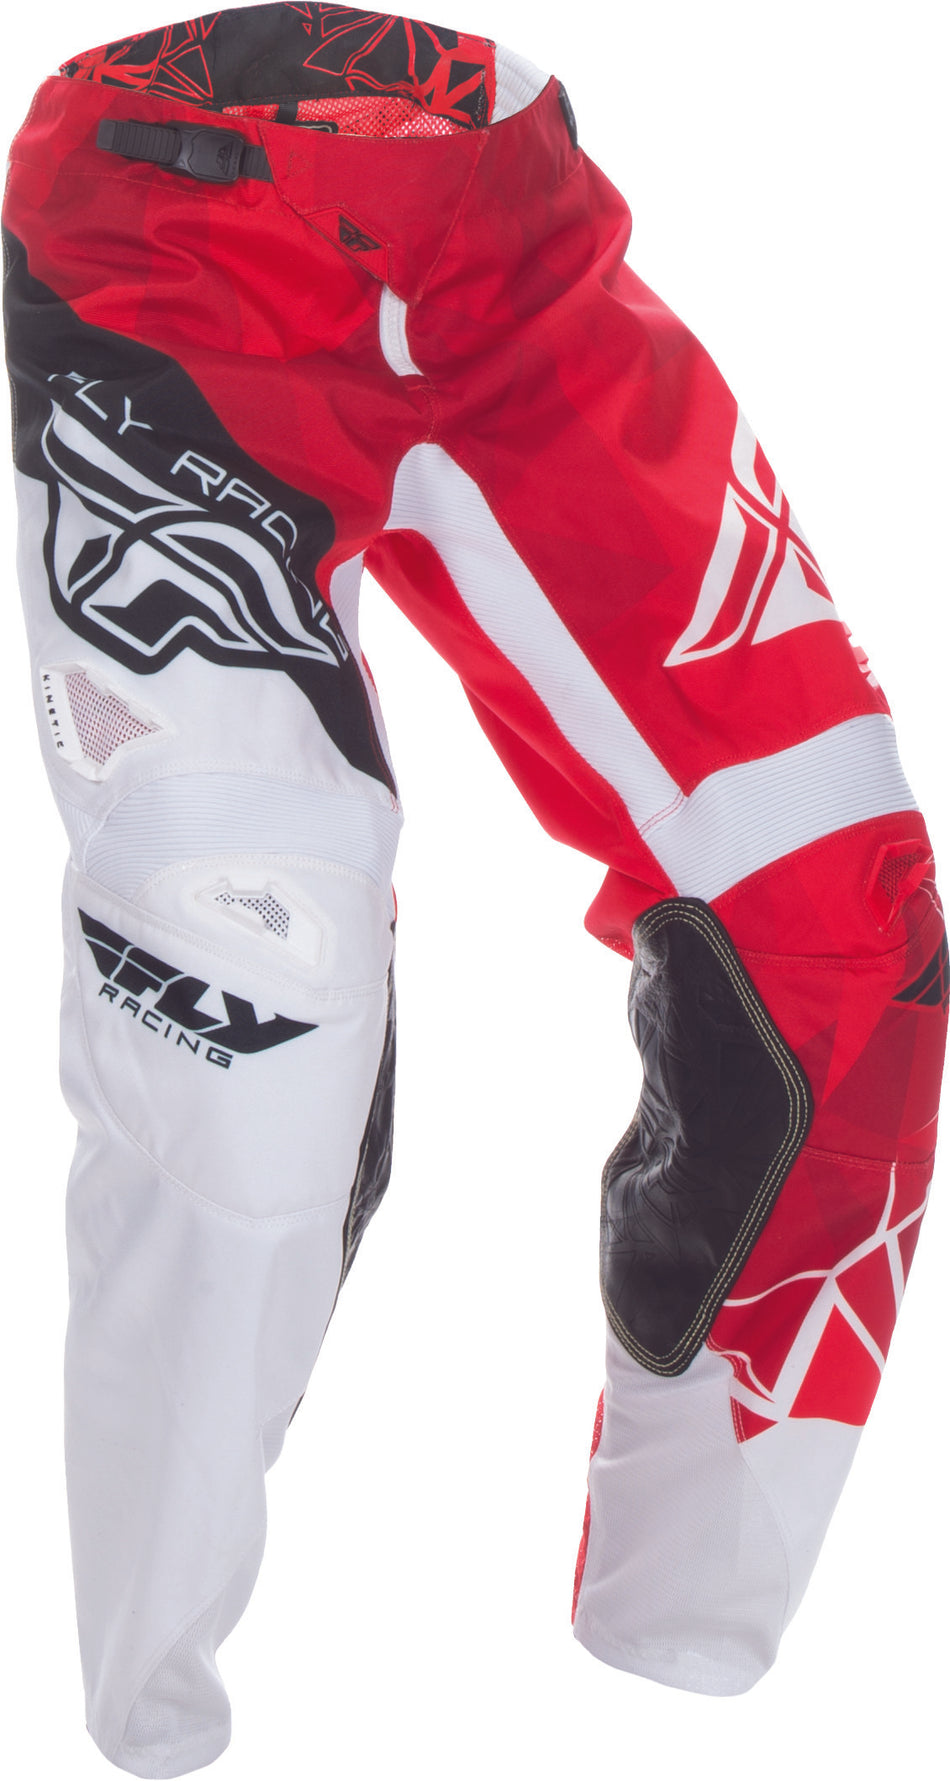 FLY RACING Kinetic Crux Pant Red/White Sz 32 370-53232